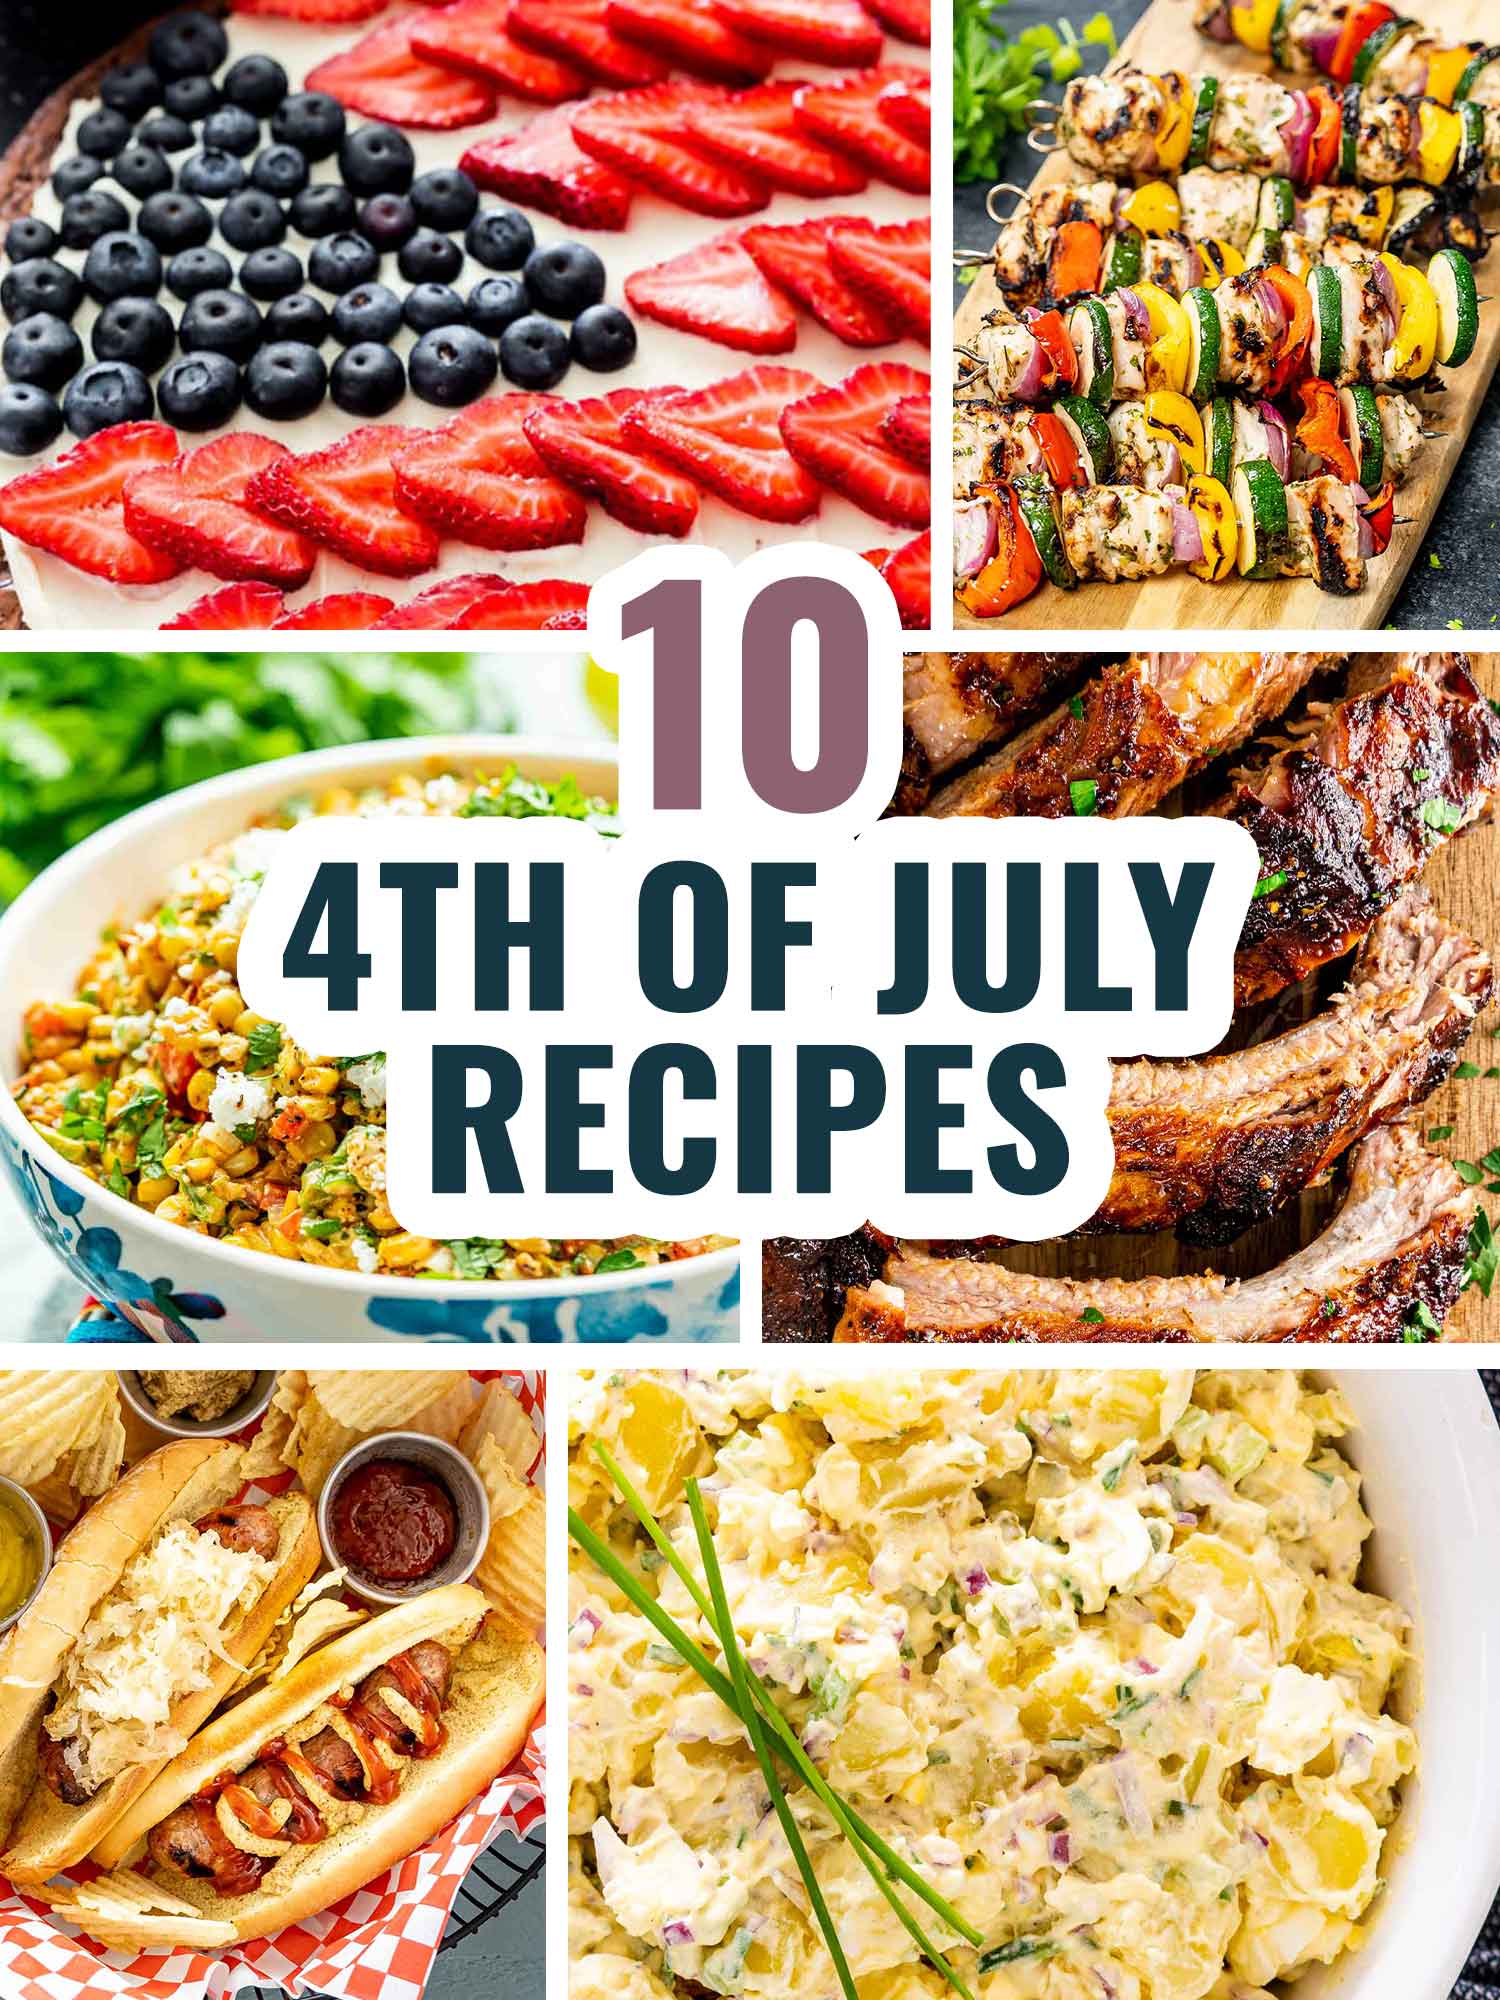 10 fourth of july recipes collage.